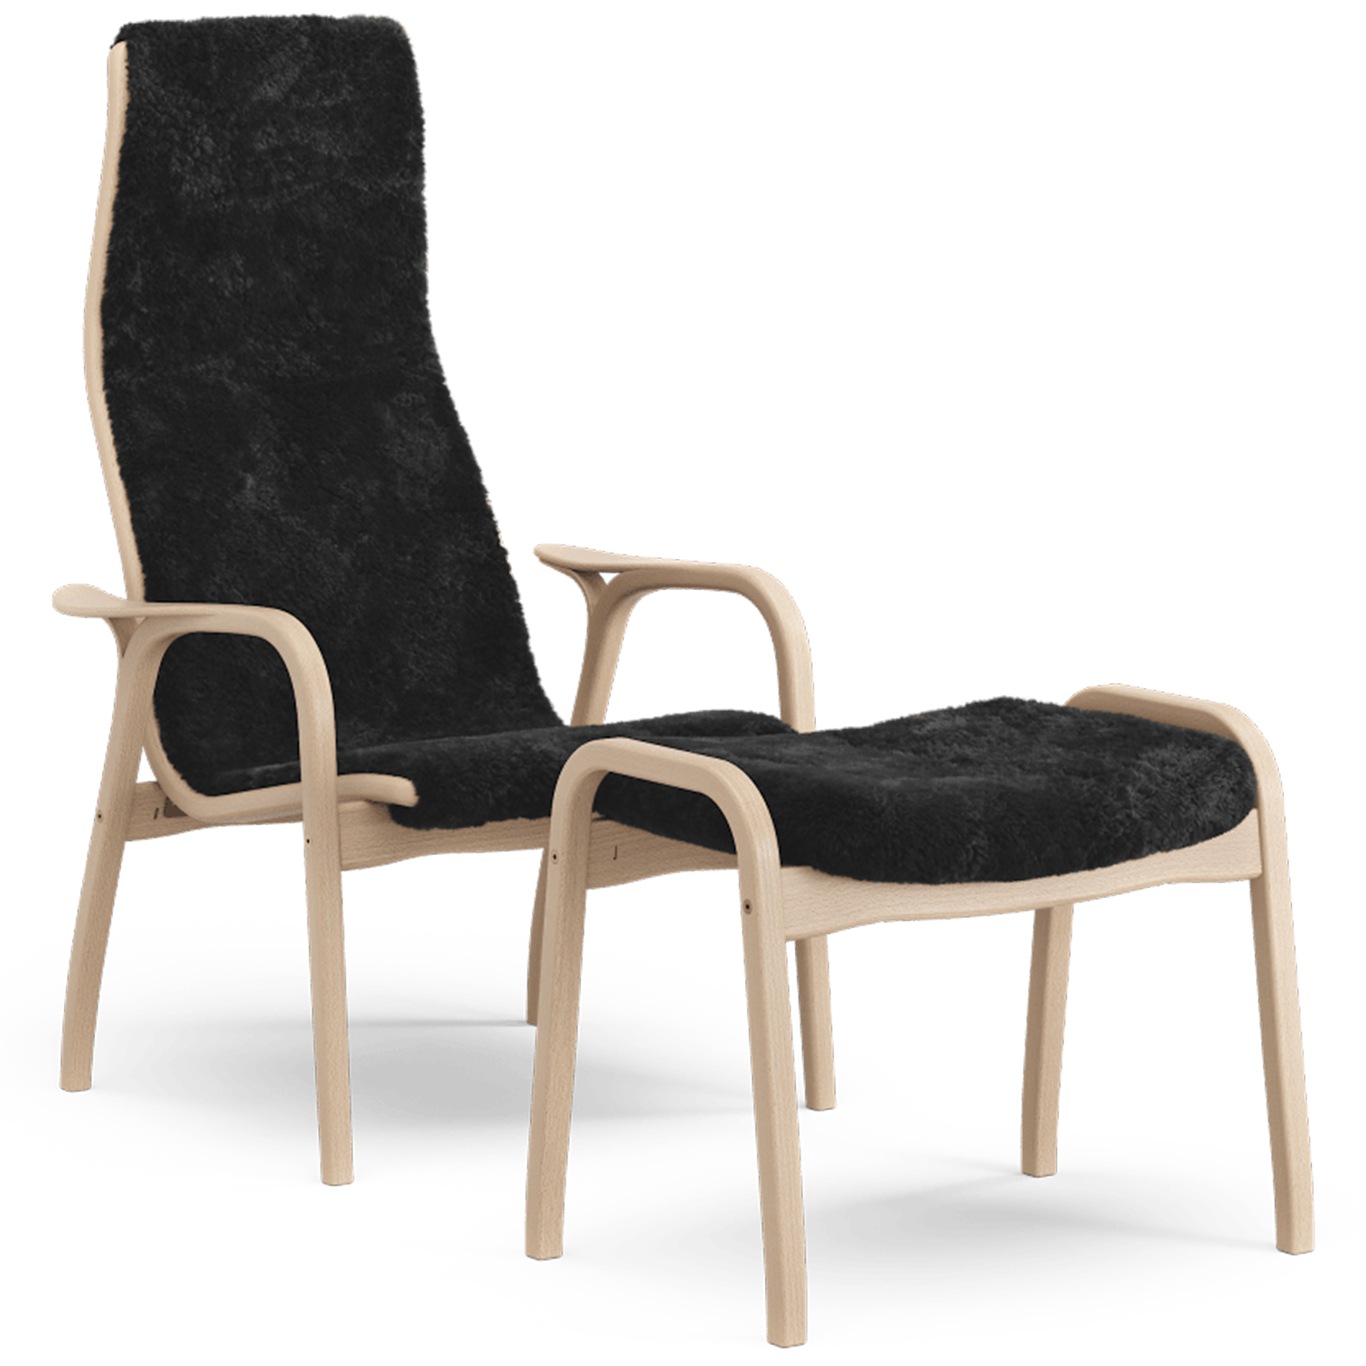 Lamino Armchair With Footstool Sheepskin, Black / Lacquered Beech